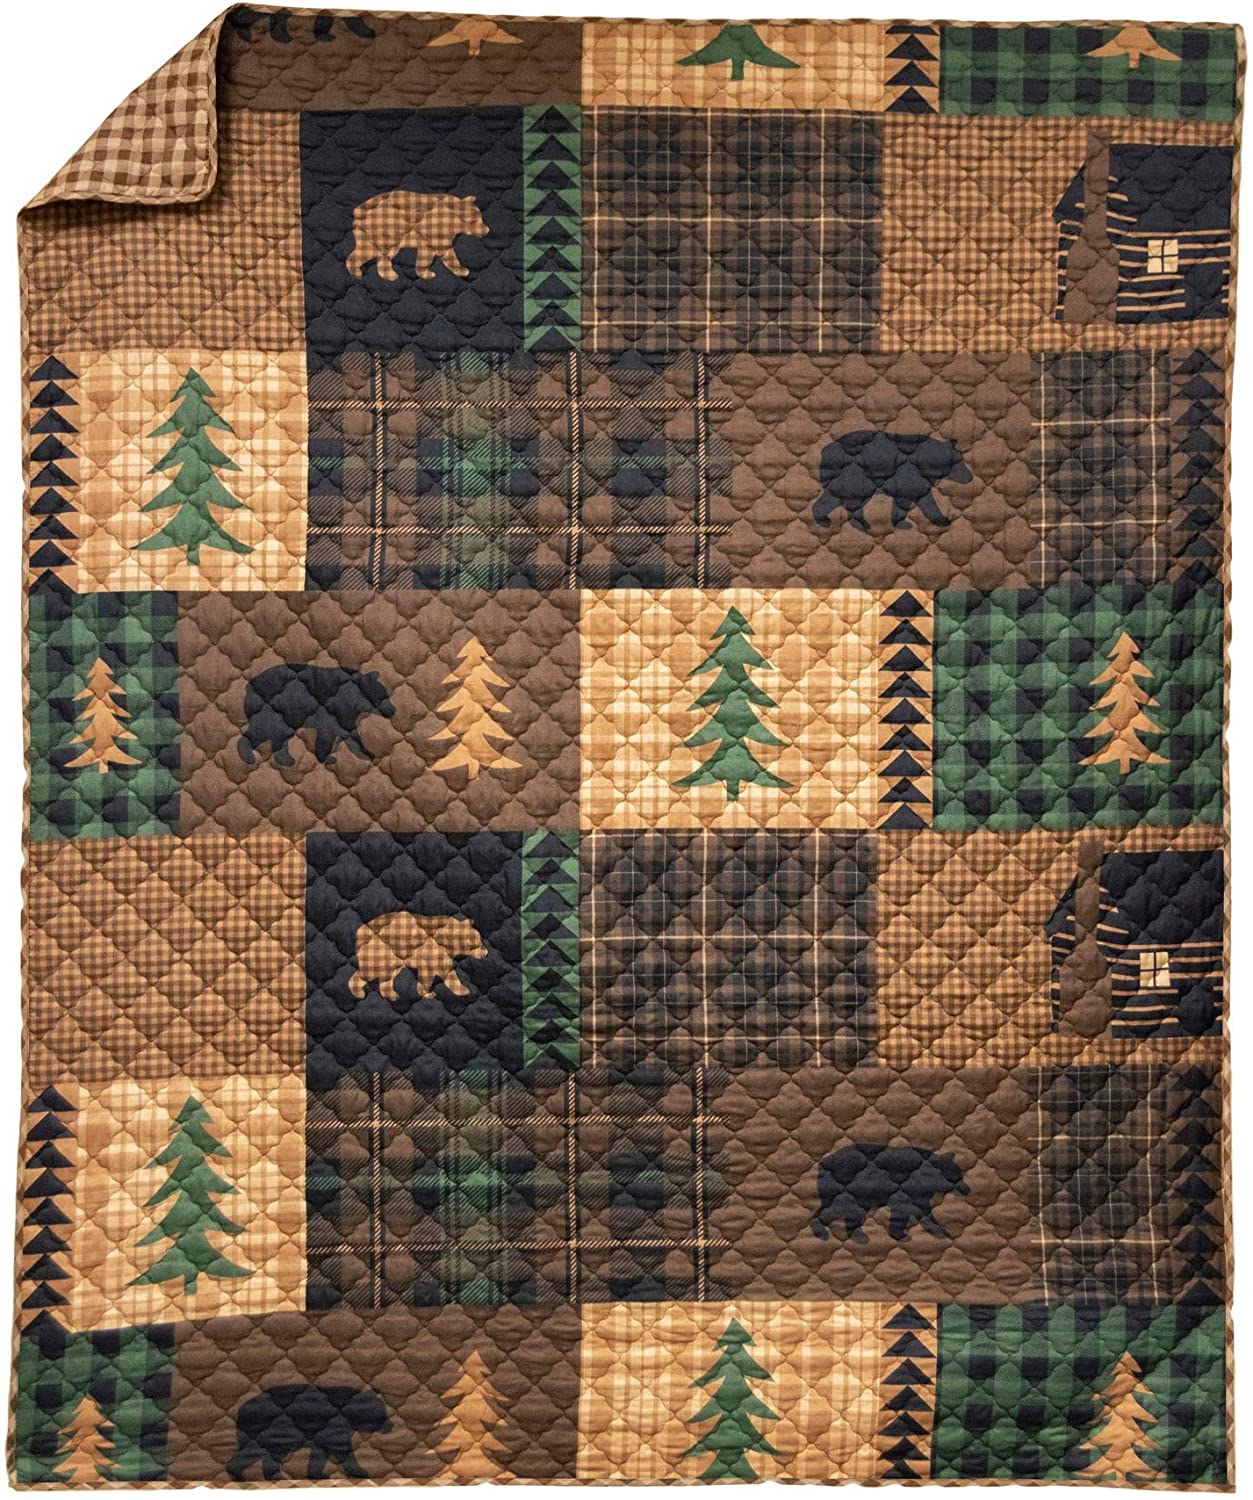 MISC Your LifeDesign/Look Brown Bear Cabin Throw Black Patchwork Plaid Lodge Rustic Microfiber